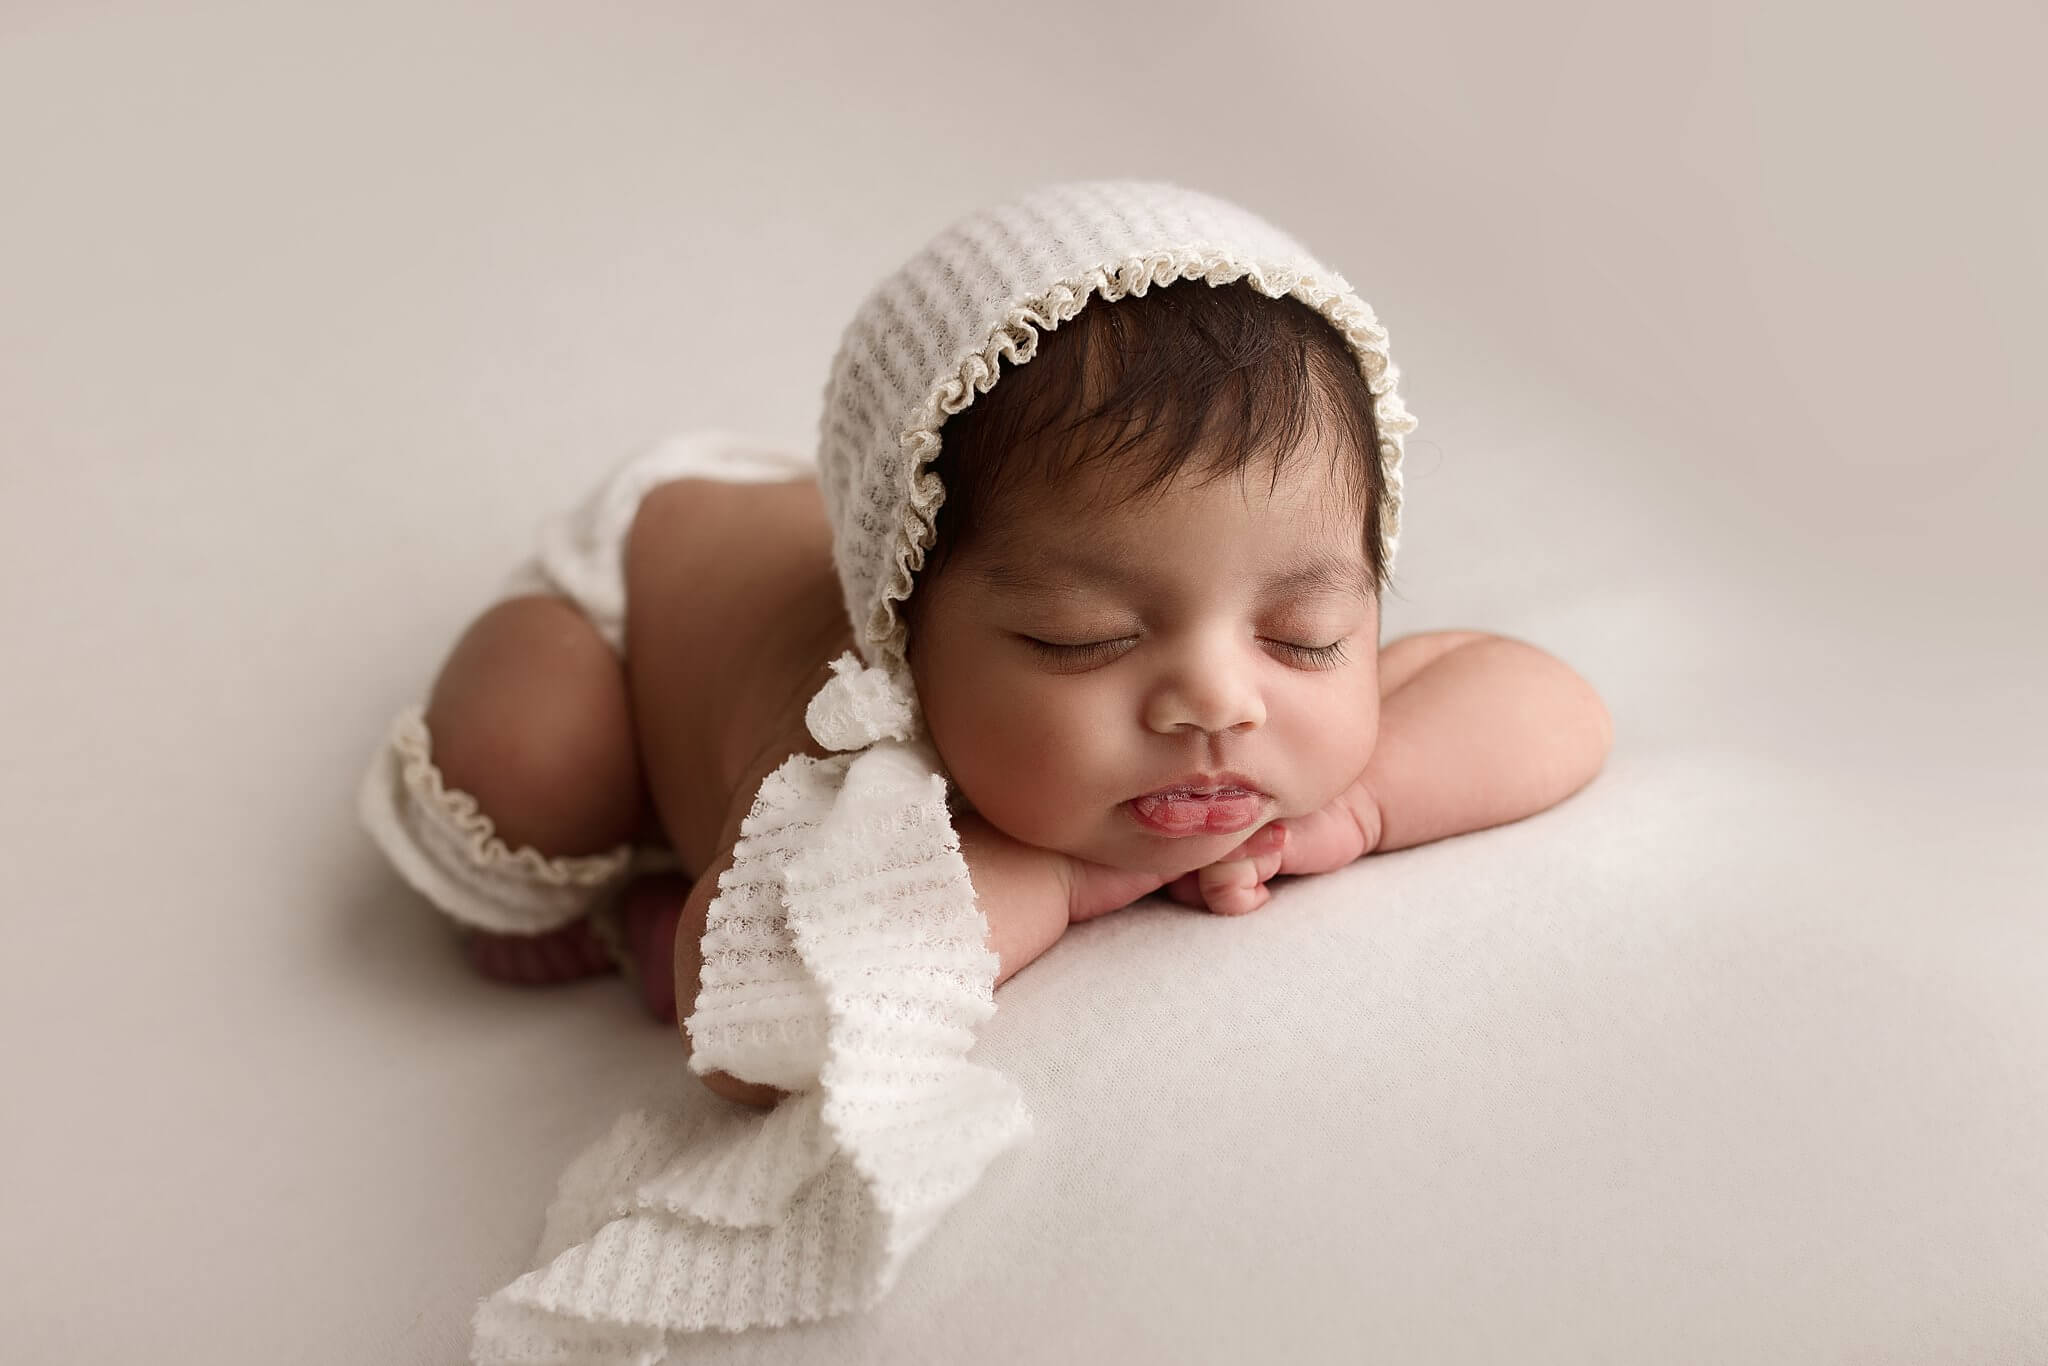 Newborn Baby Girl in a white bonnet and leg warmers laying on a simple white backdrop